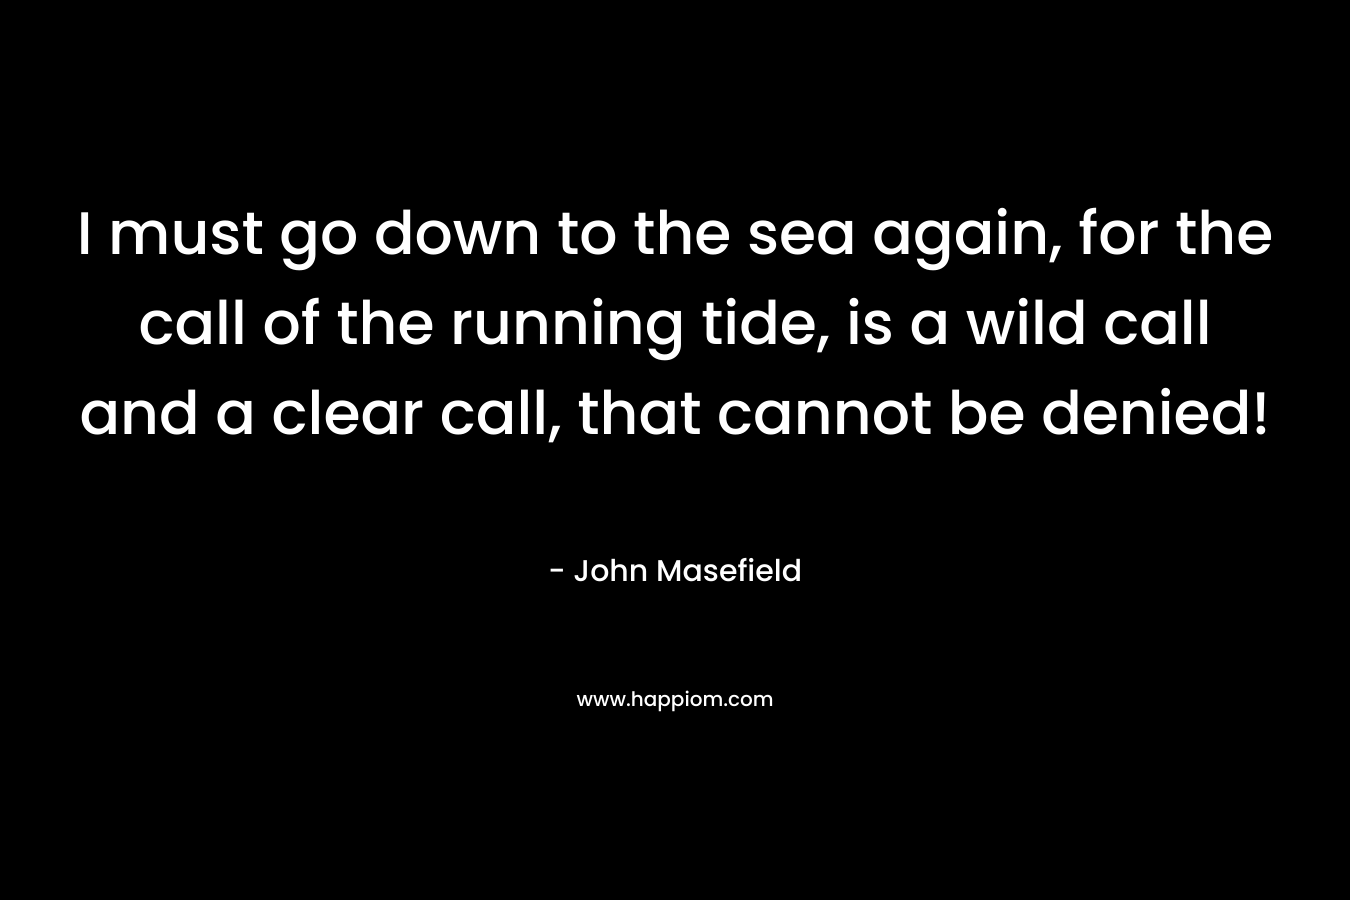 I must go down to the sea again, for the call of the running tide, is a wild call and a clear call, that cannot be denied! – John Masefield